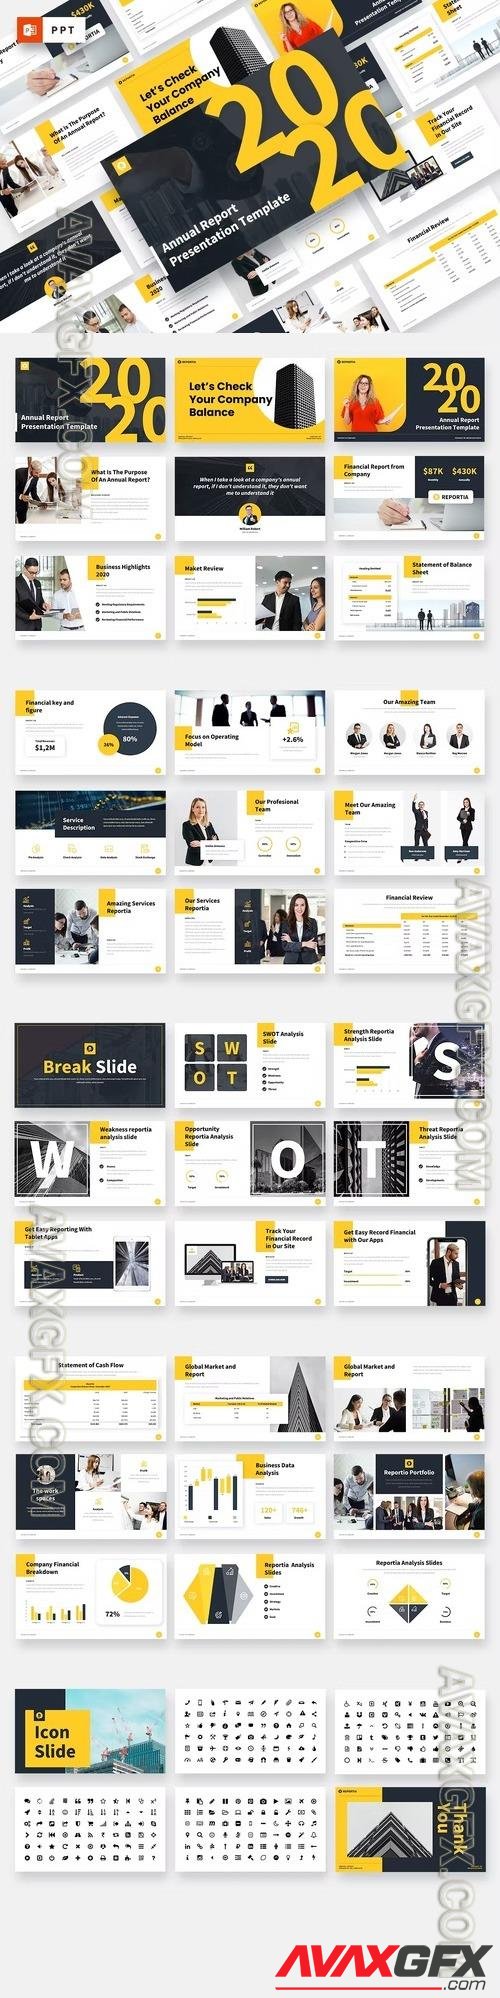 Reportia - Annual Report Powerpoint Template